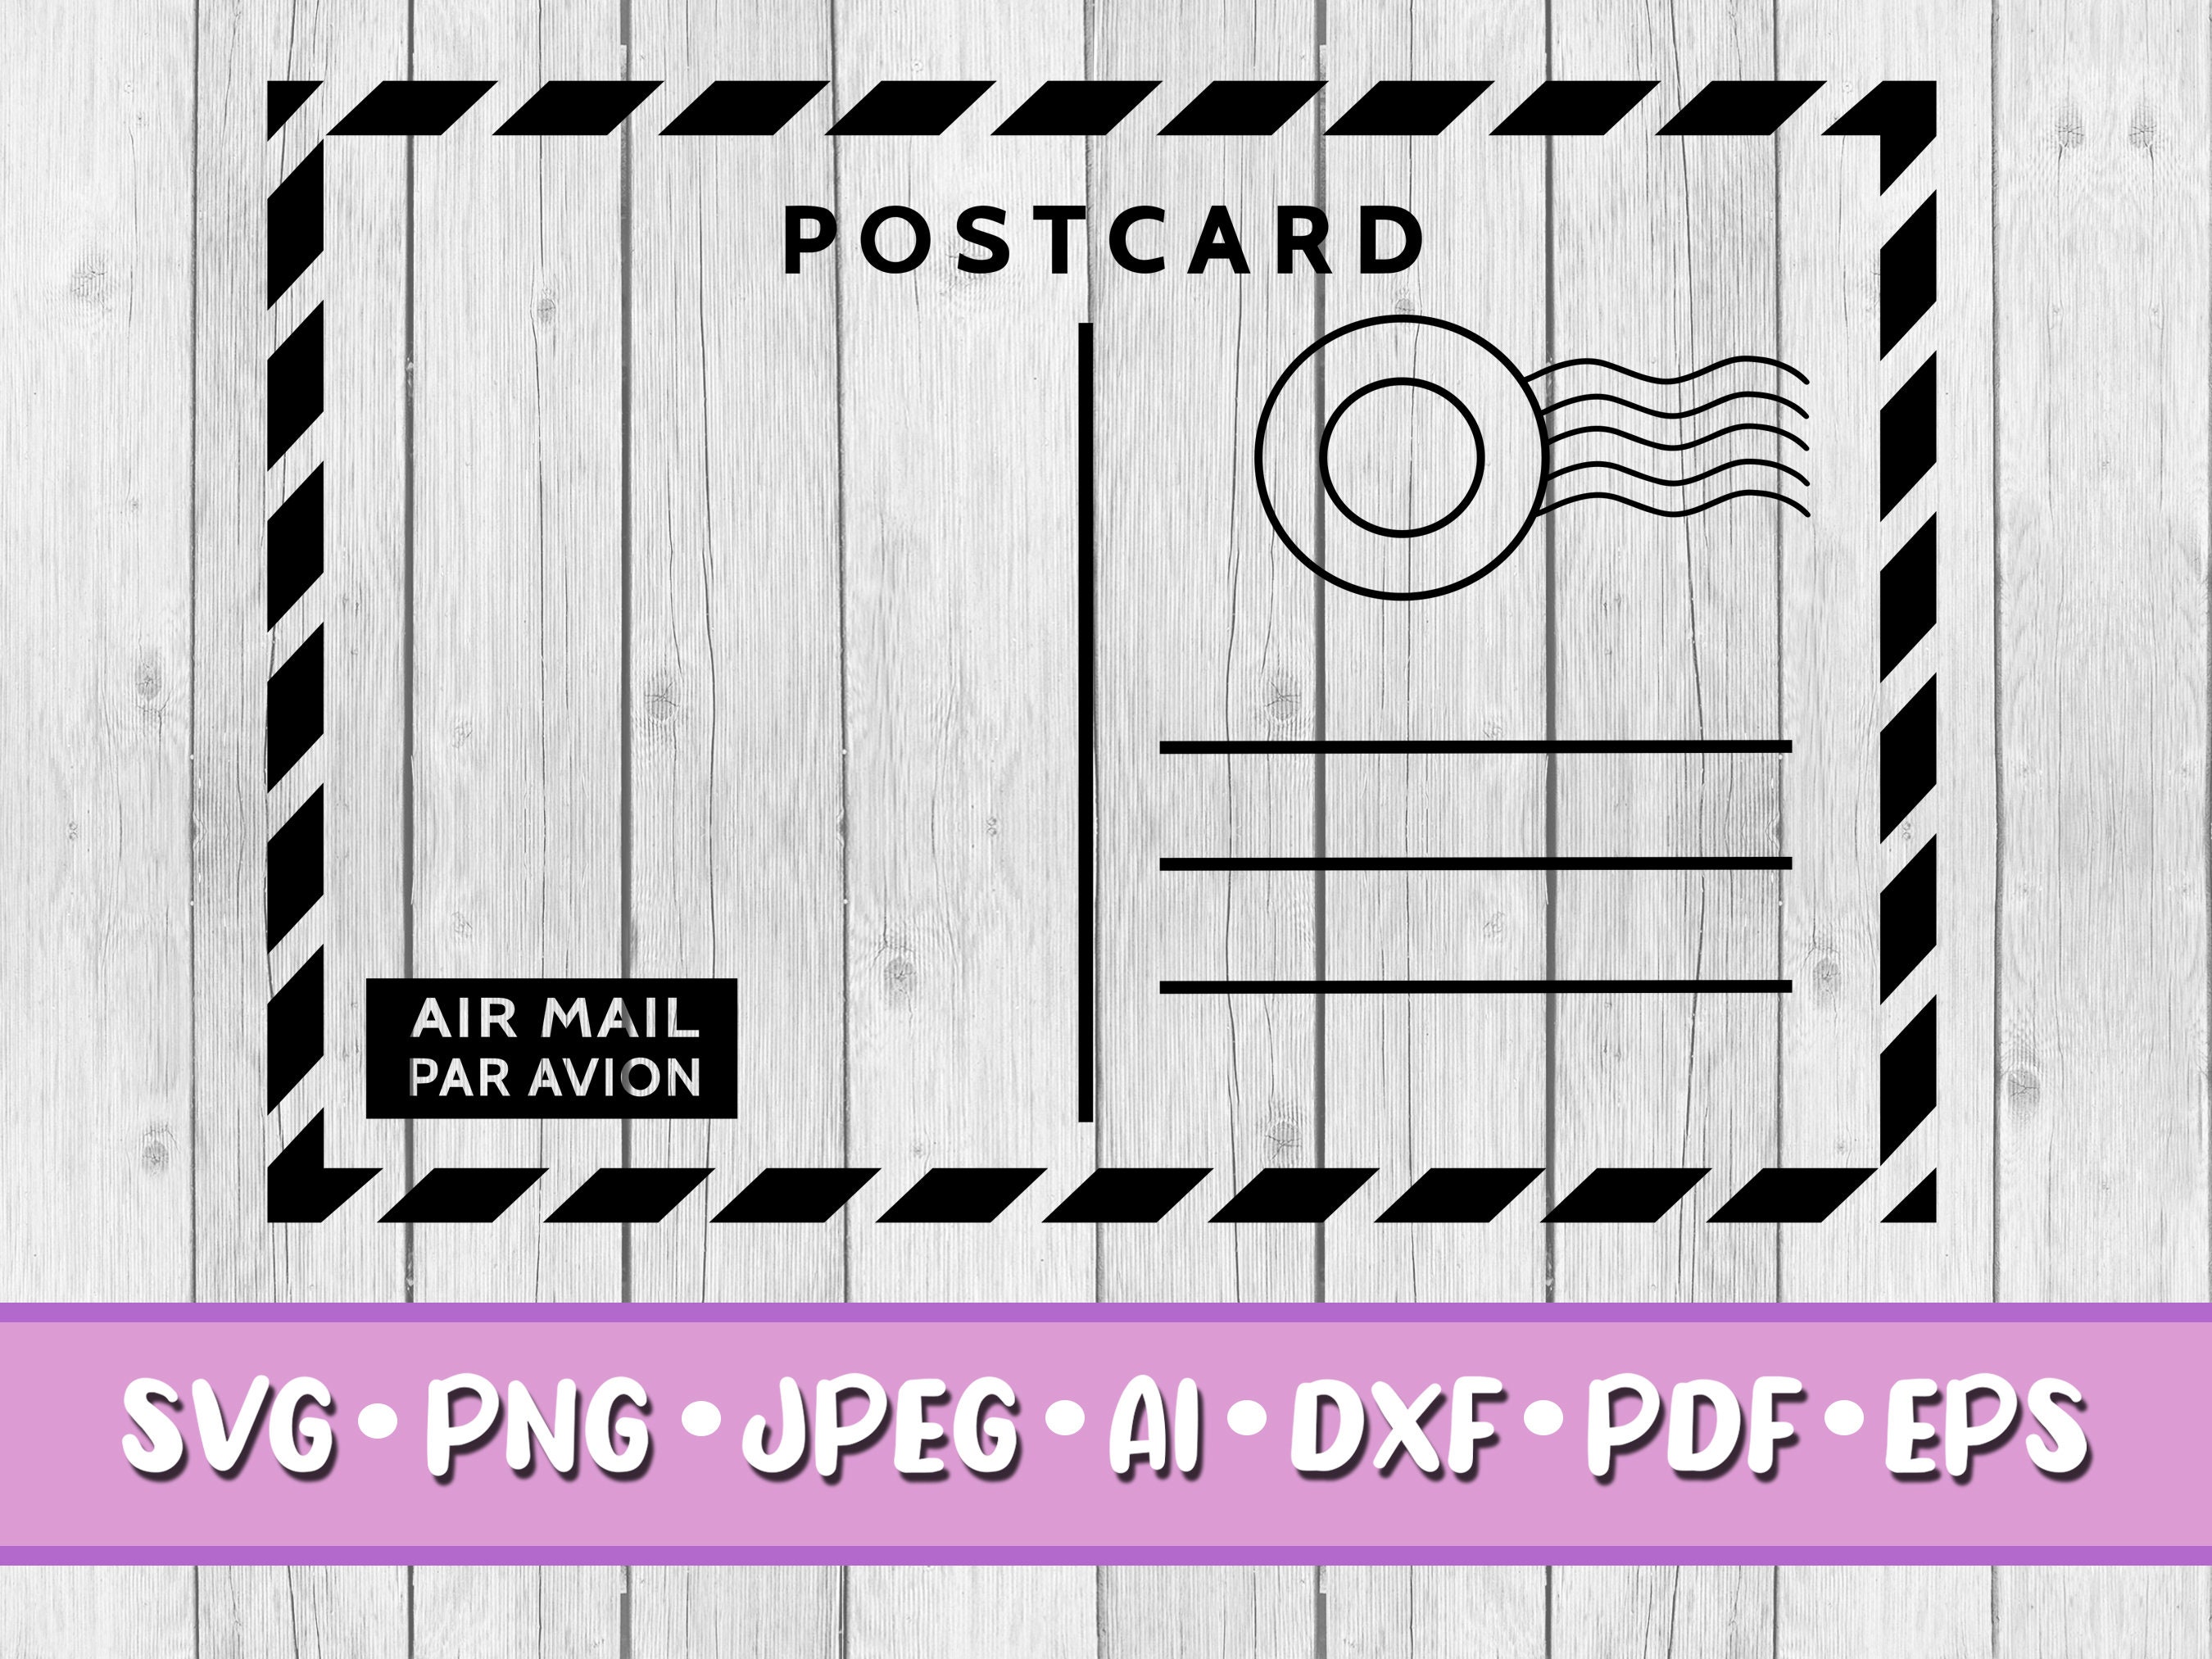 air mail postcard frame with copy space for your text or design